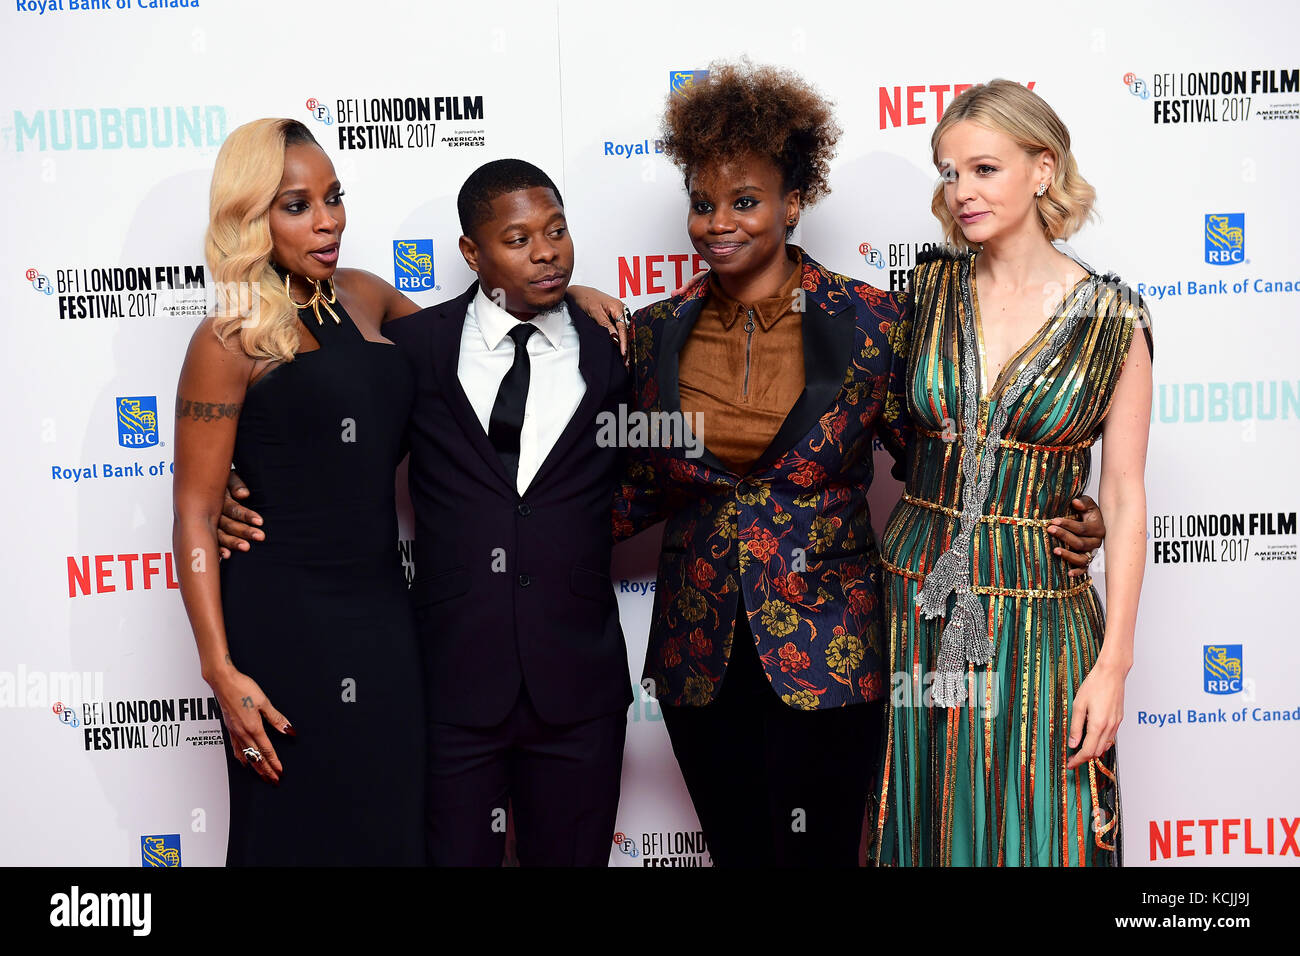 Mary J Blige, Jason Mitchell, Dee Rees and Carey Mulligan attending the Premiere of Mudbound as part of the BFI London Film Festival, at The Odeon Leicester Square, London. PRESS ASSOCIATION Photo. Picture date: Thursday October 5, 2017. See PA story SHOWBIZ Mudbound. Photo credit should read: Ian West/PA Wire Stock Photo